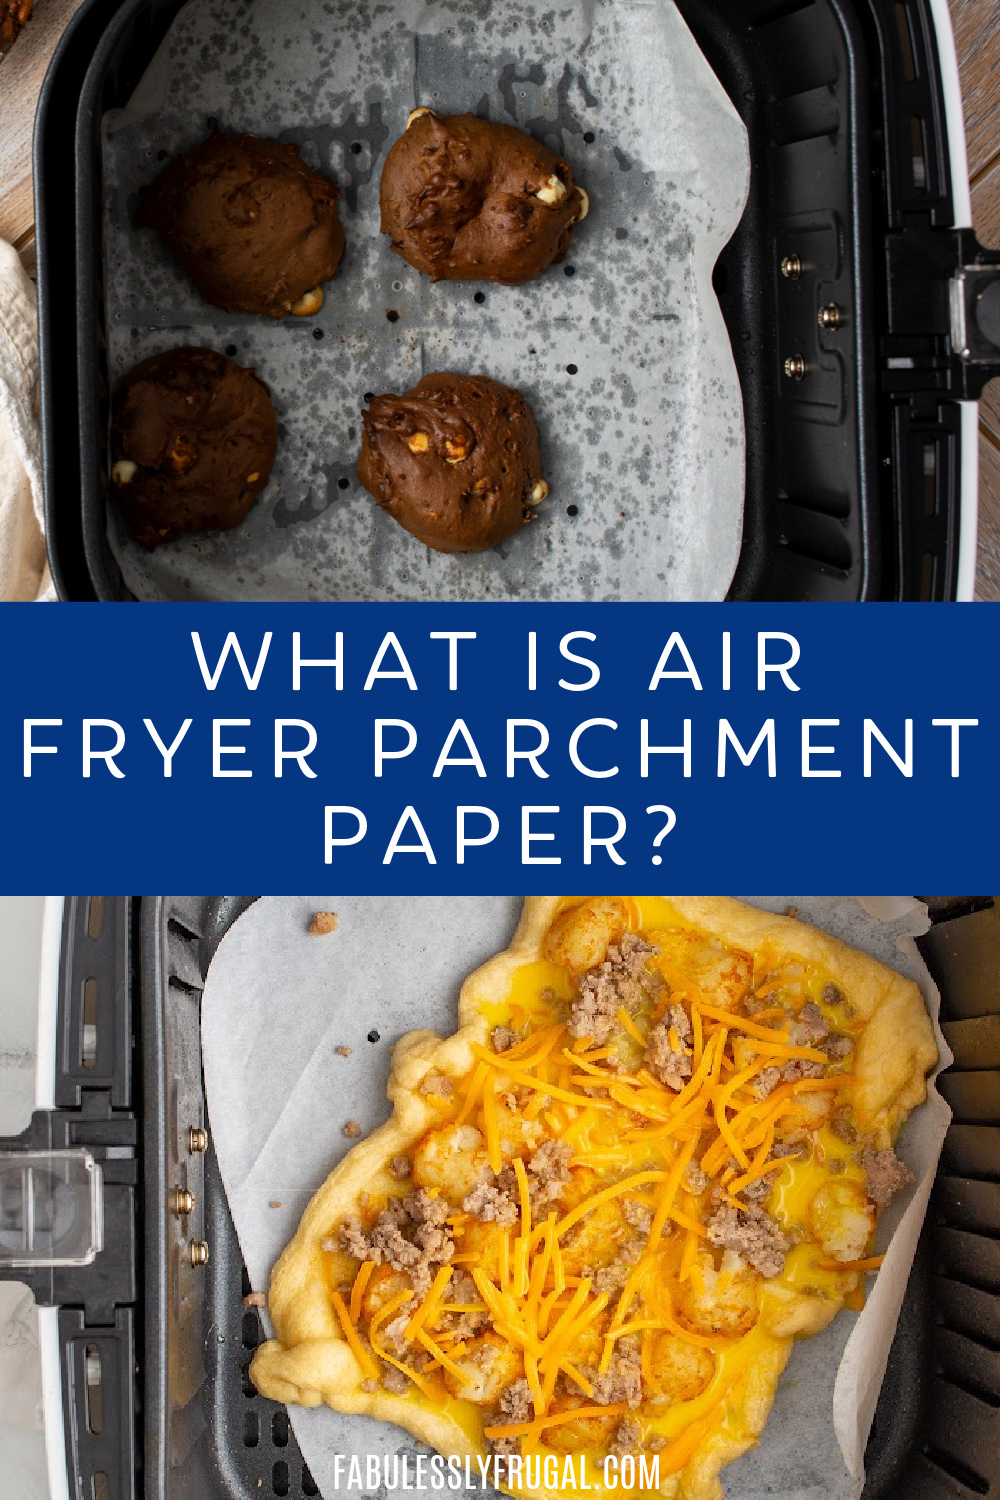 https://fabulesslyfrugal.com/wp-content/uploads/2023/01/everything-you-need-to-know-about-air-fryer-parchment-paper-1-1.jpg